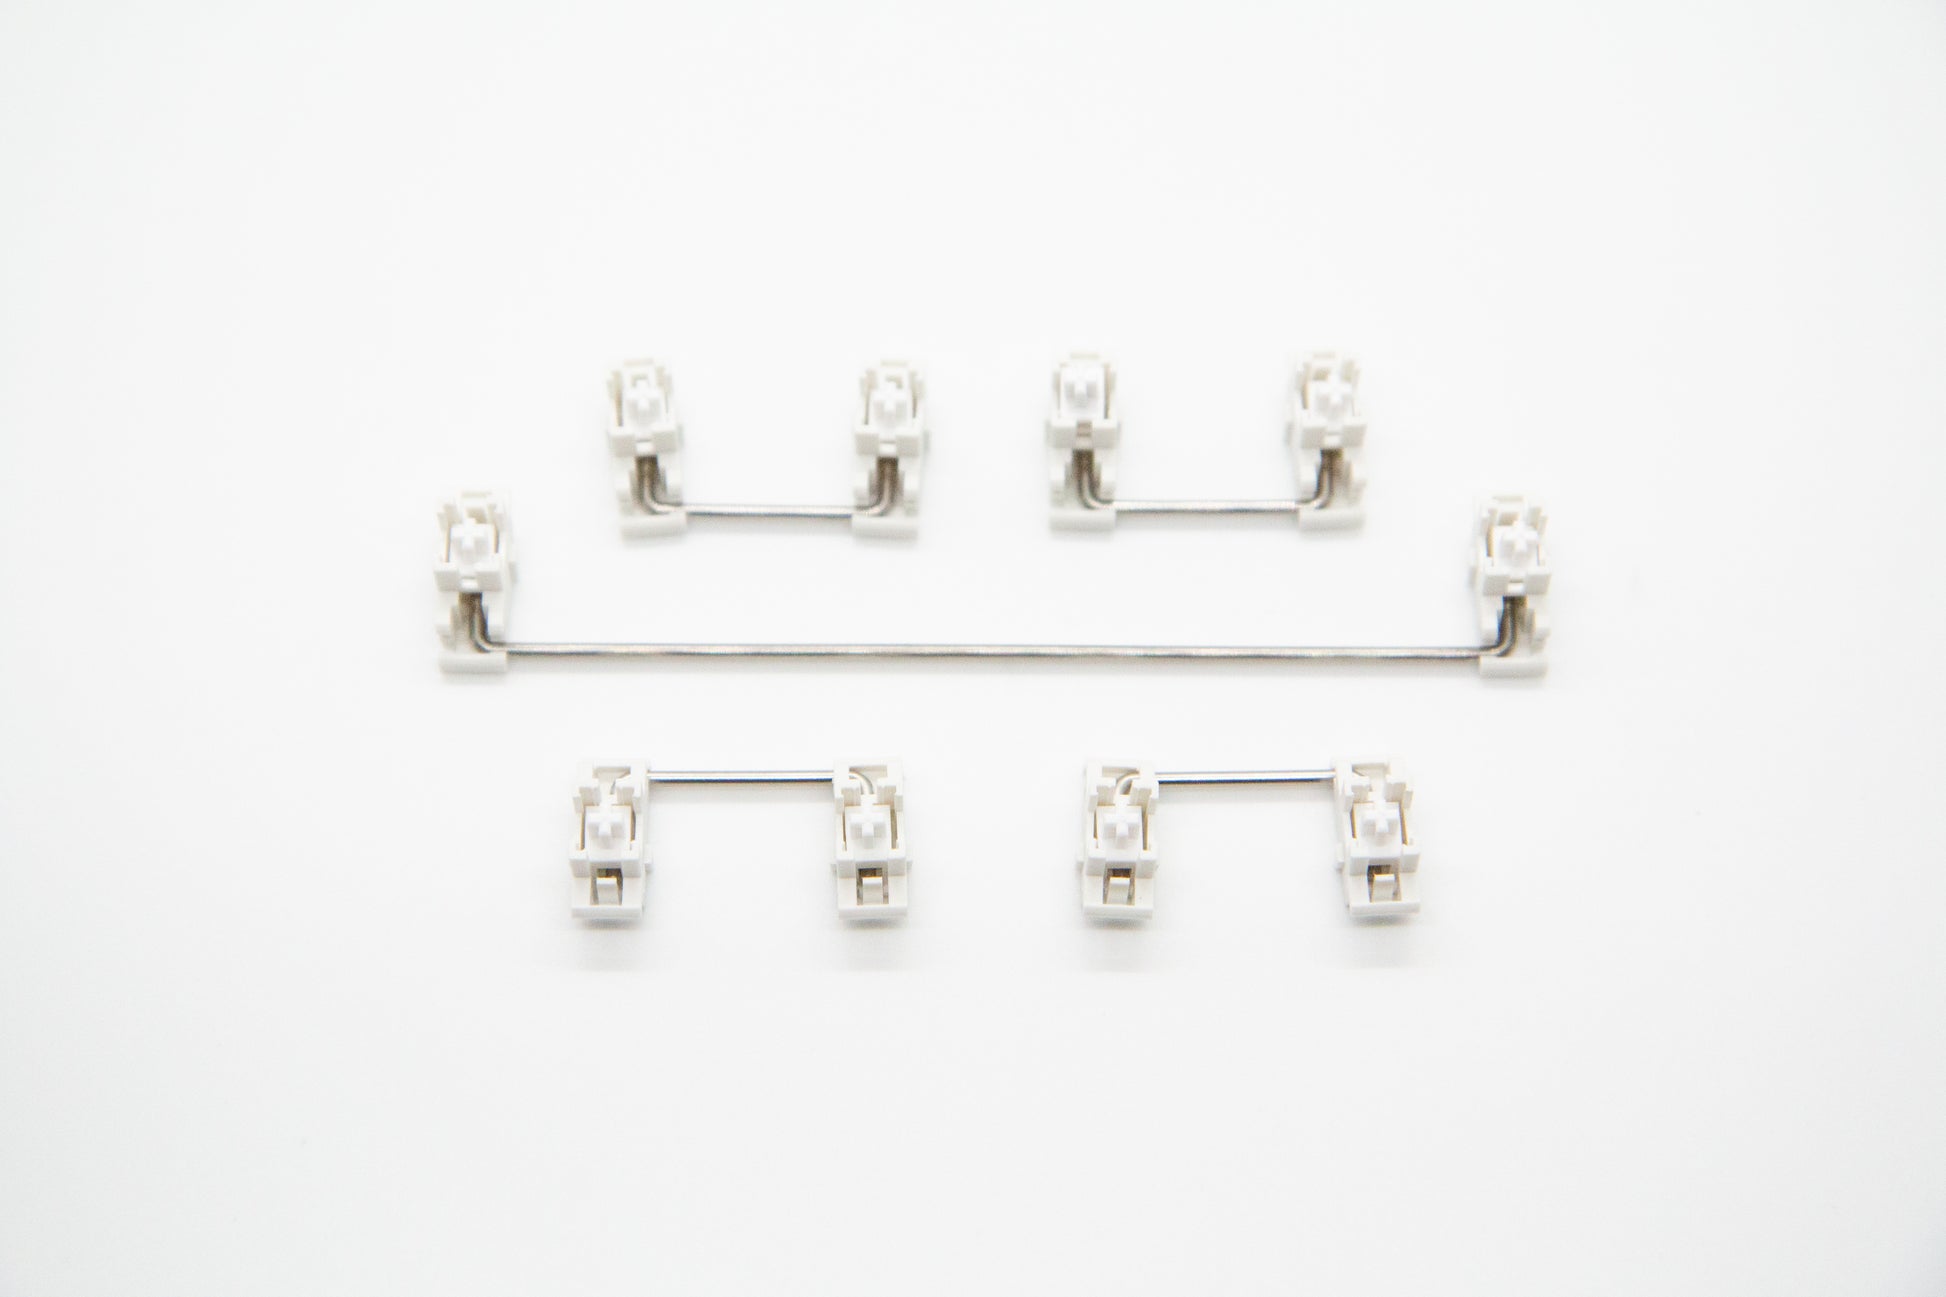 Overhead shot of PCB mounted white mechanical keyboard Durock stabilizer kit in 6.25 configuration with screws and washers